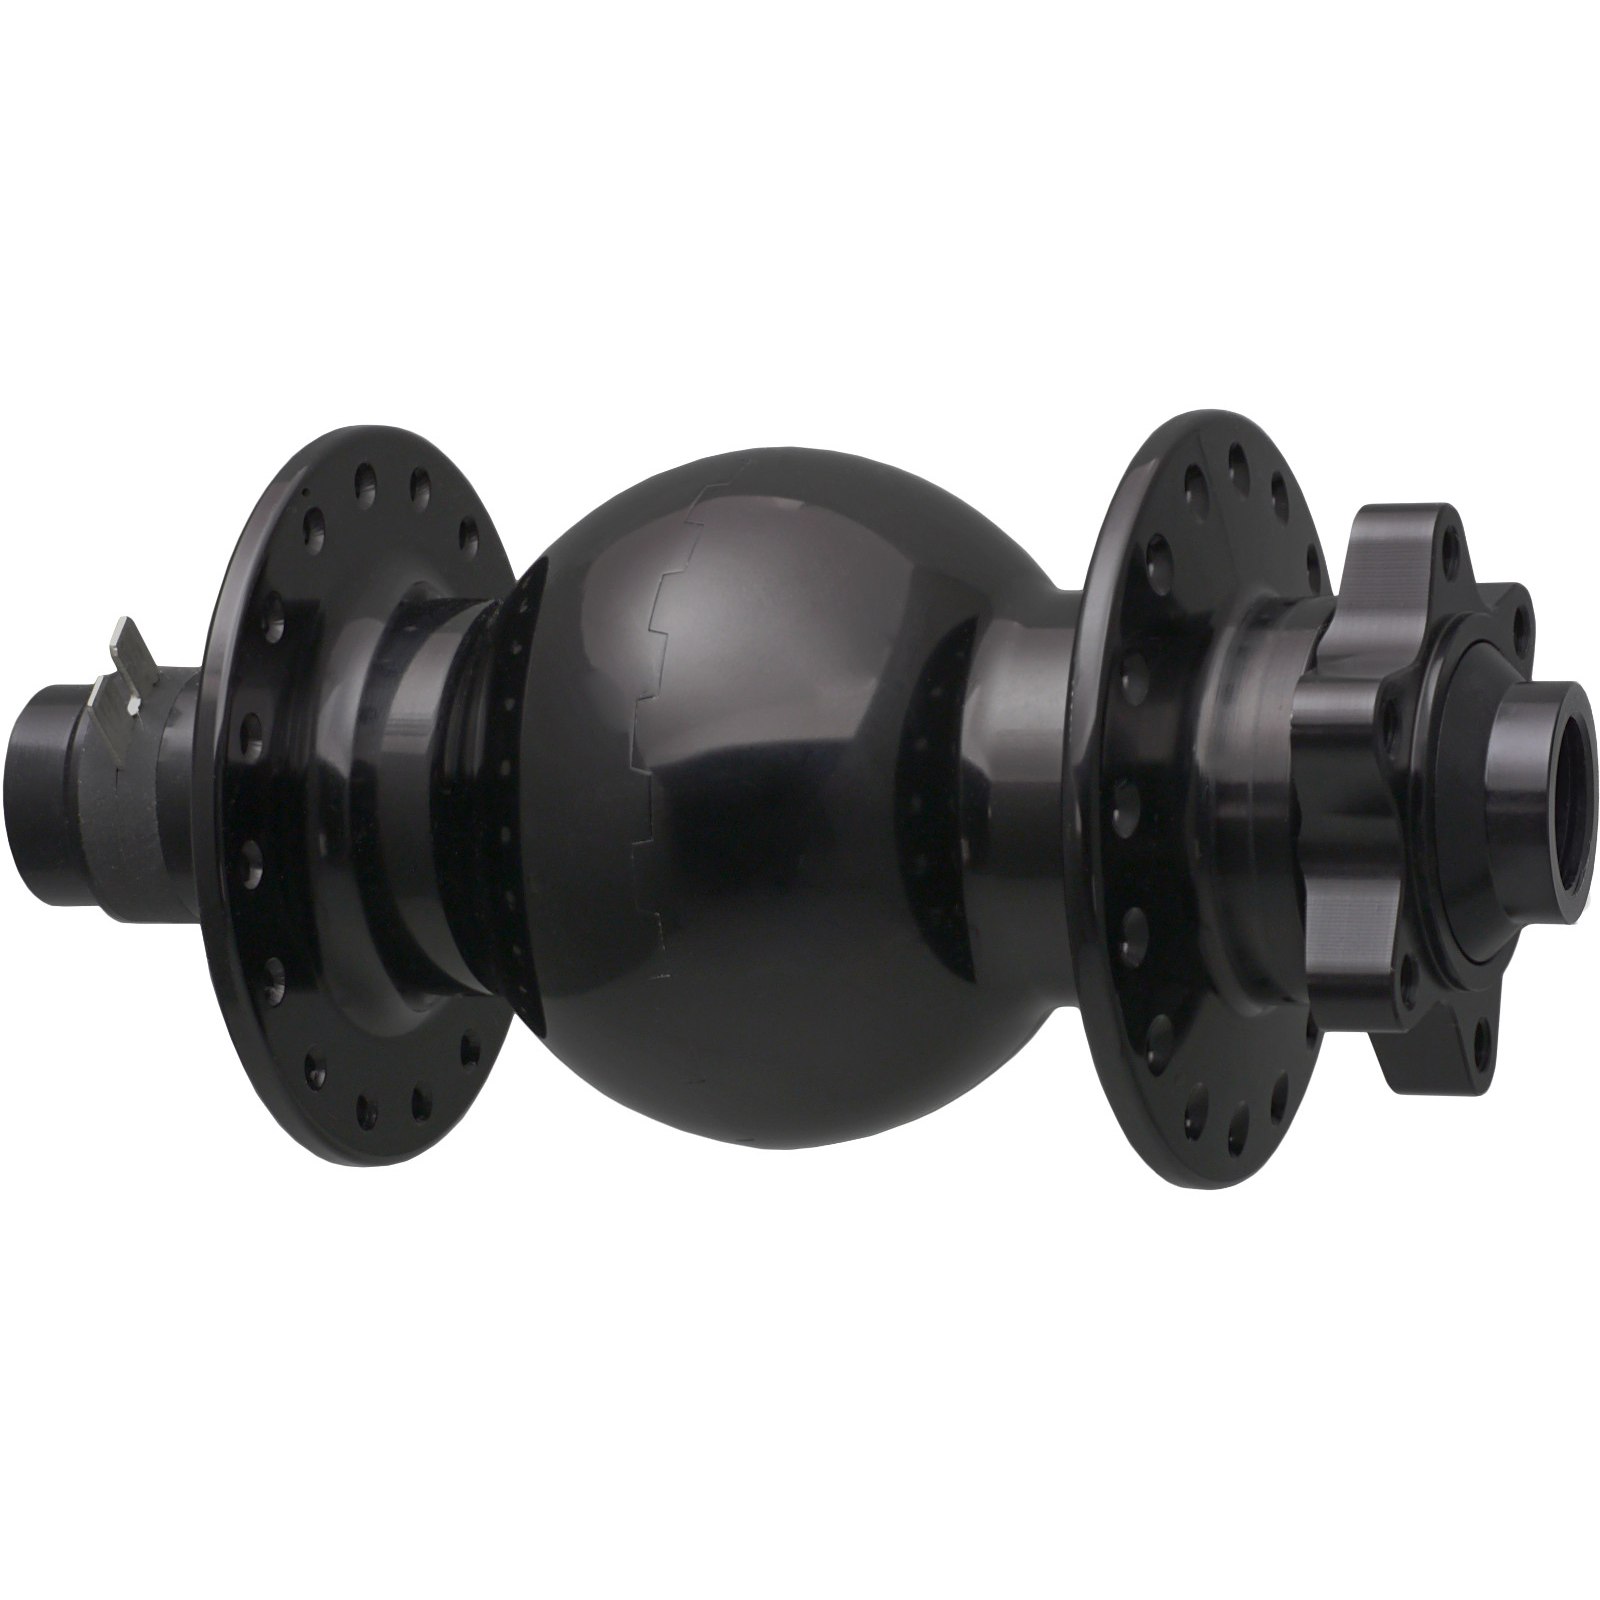 Picture of SON 28 15 150 Fatbike Hub Dynamo - 6-Bolt - 15x150mm - Front Disc Spacing - 32 Holes - black anodized